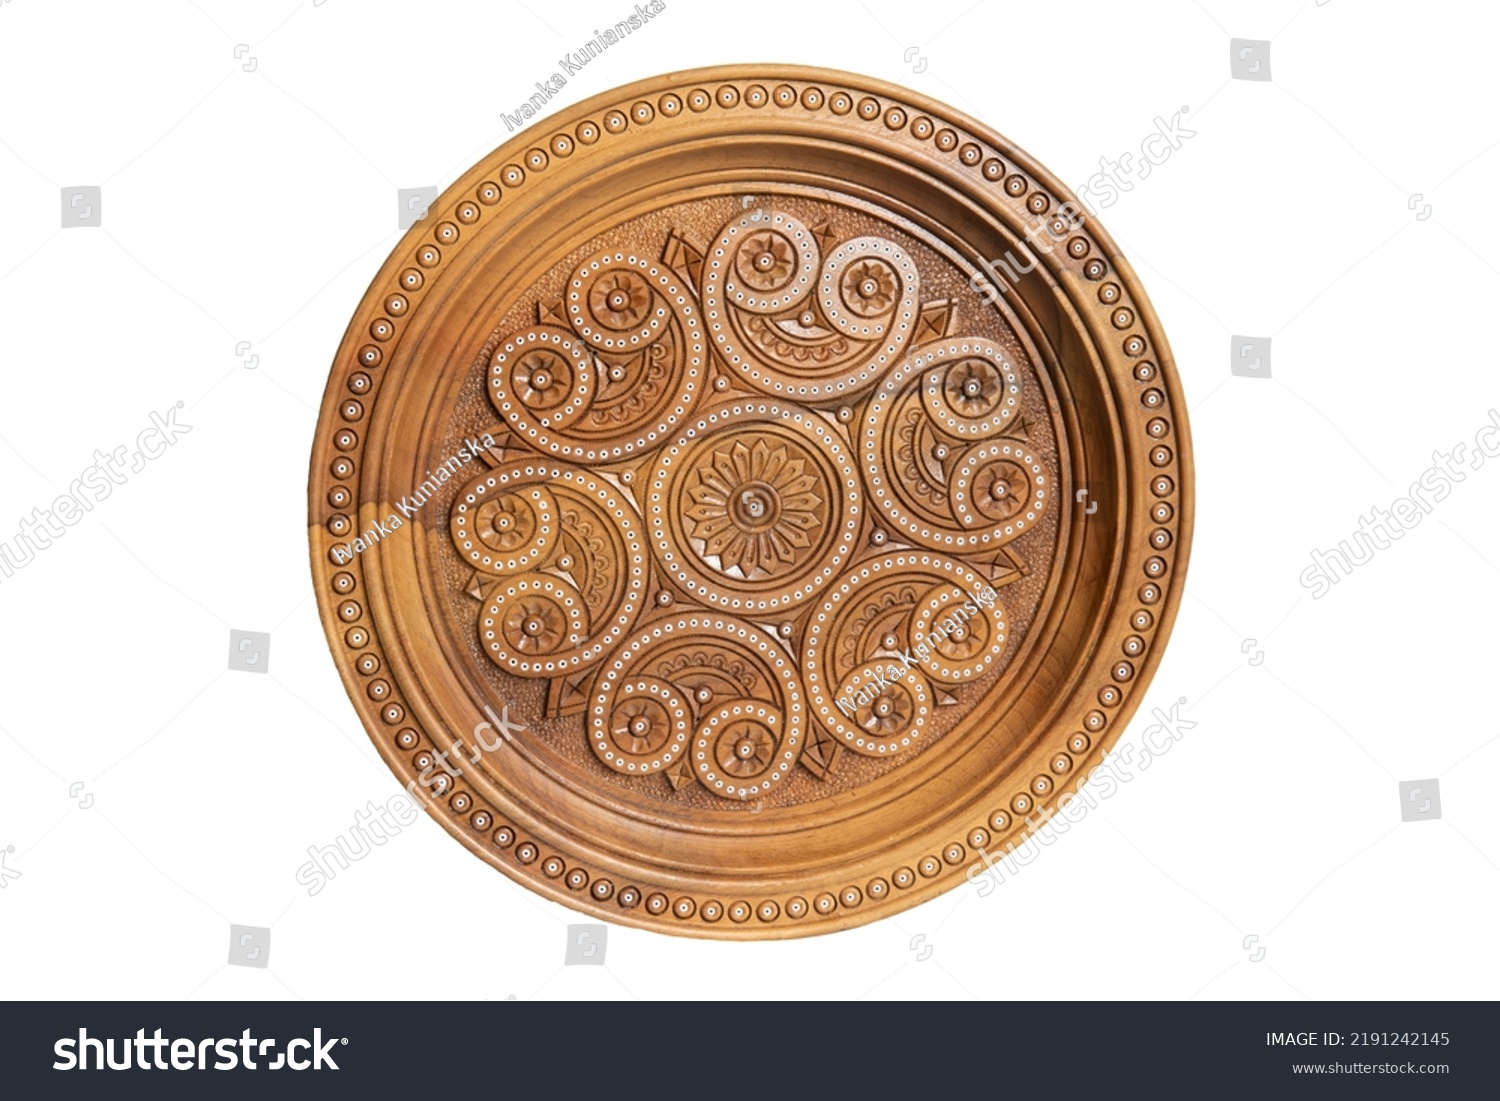 Isolated on white wooden souvenir plate with carved and decorated ornament #2191242145